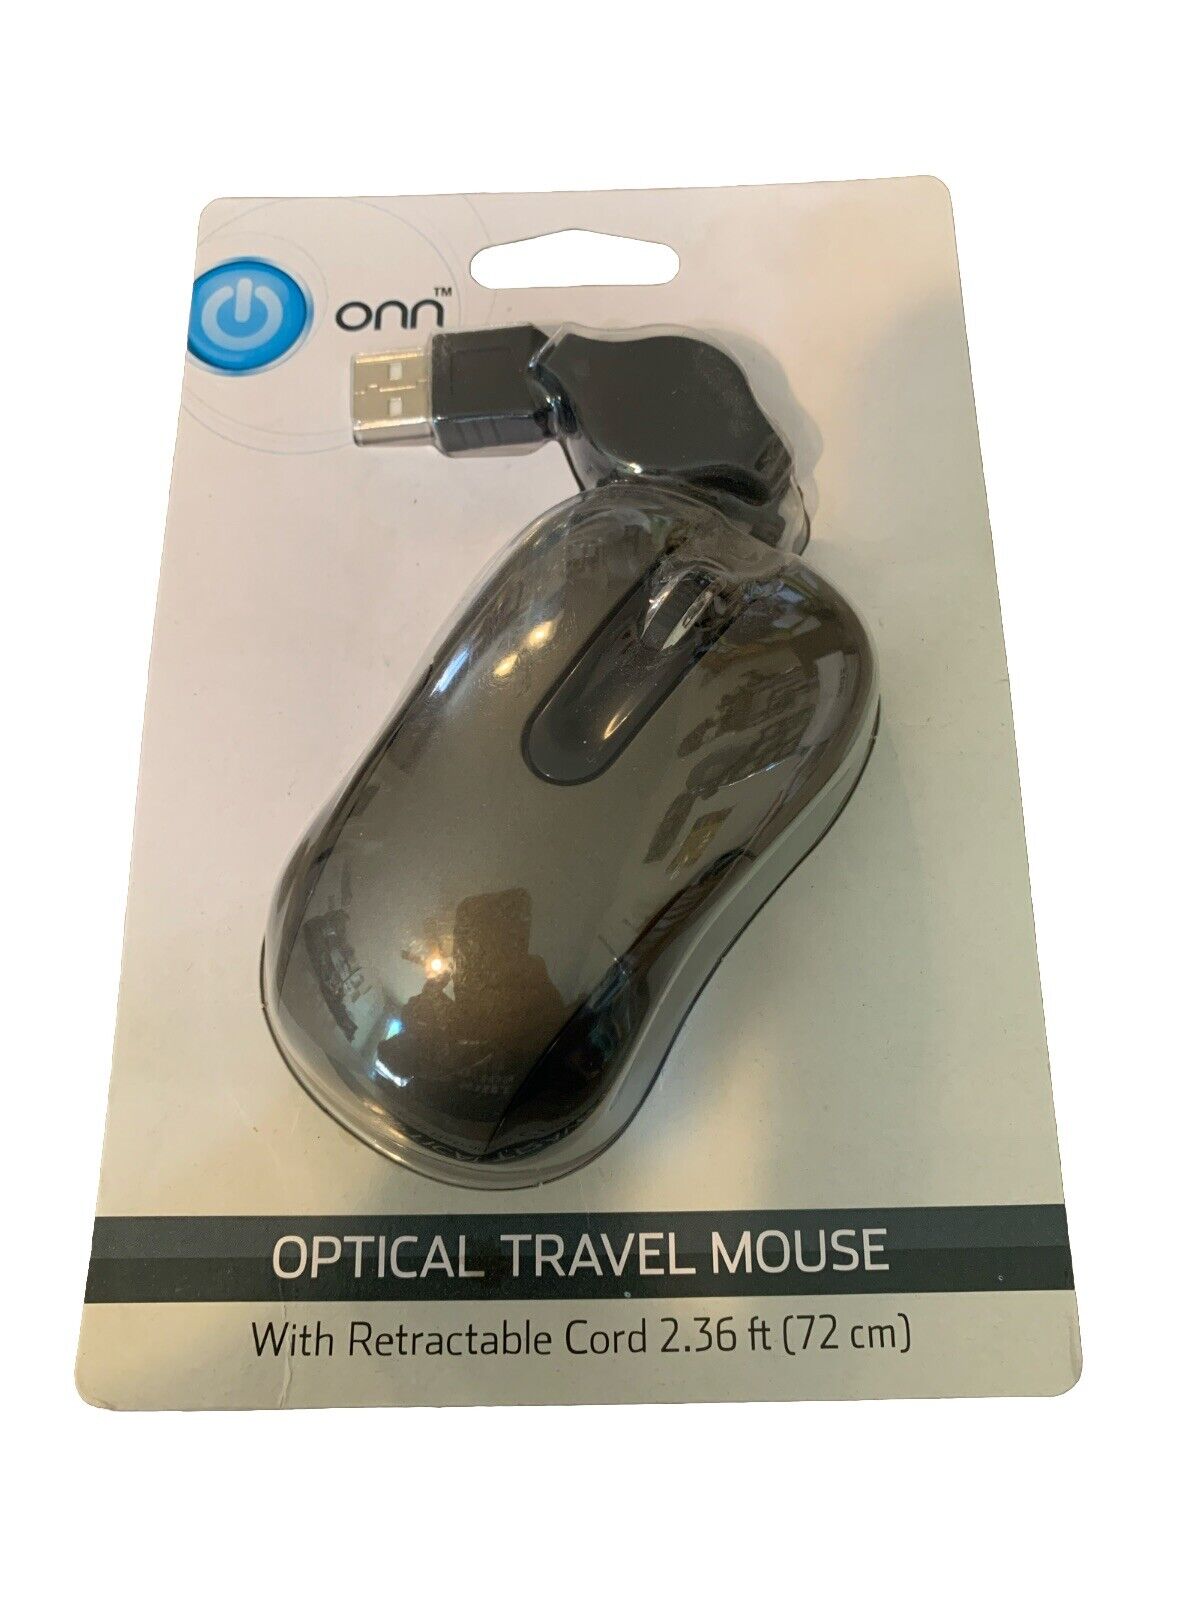 ONN OPTICAL TRAVEL MOUSE 2\' RETRACTABLE CORD. - NEW.